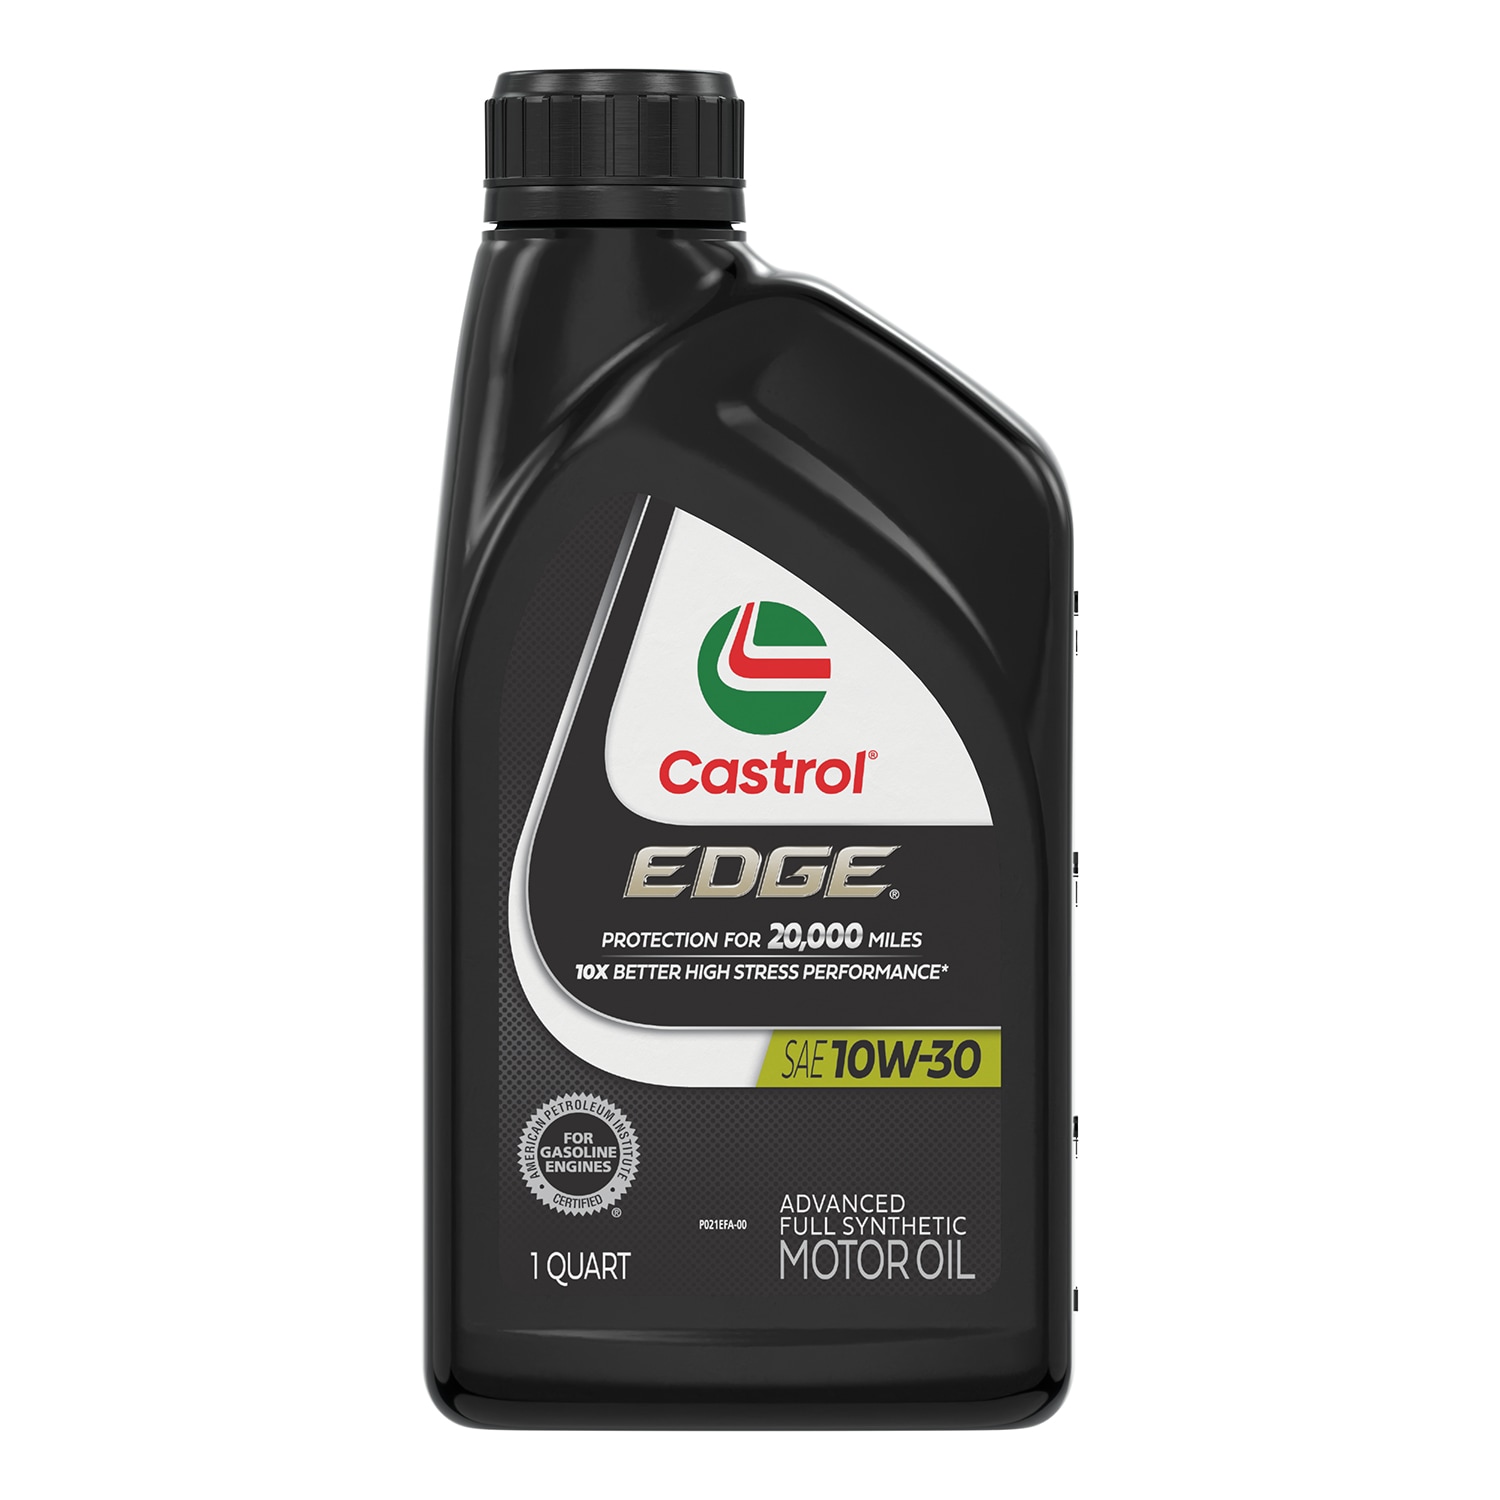 CASTROL 1 Quart 10W-30 Motor Oil for Maximum Engine Protection and  Performance in the Motor Oil u0026 Additives department at Lowes.com